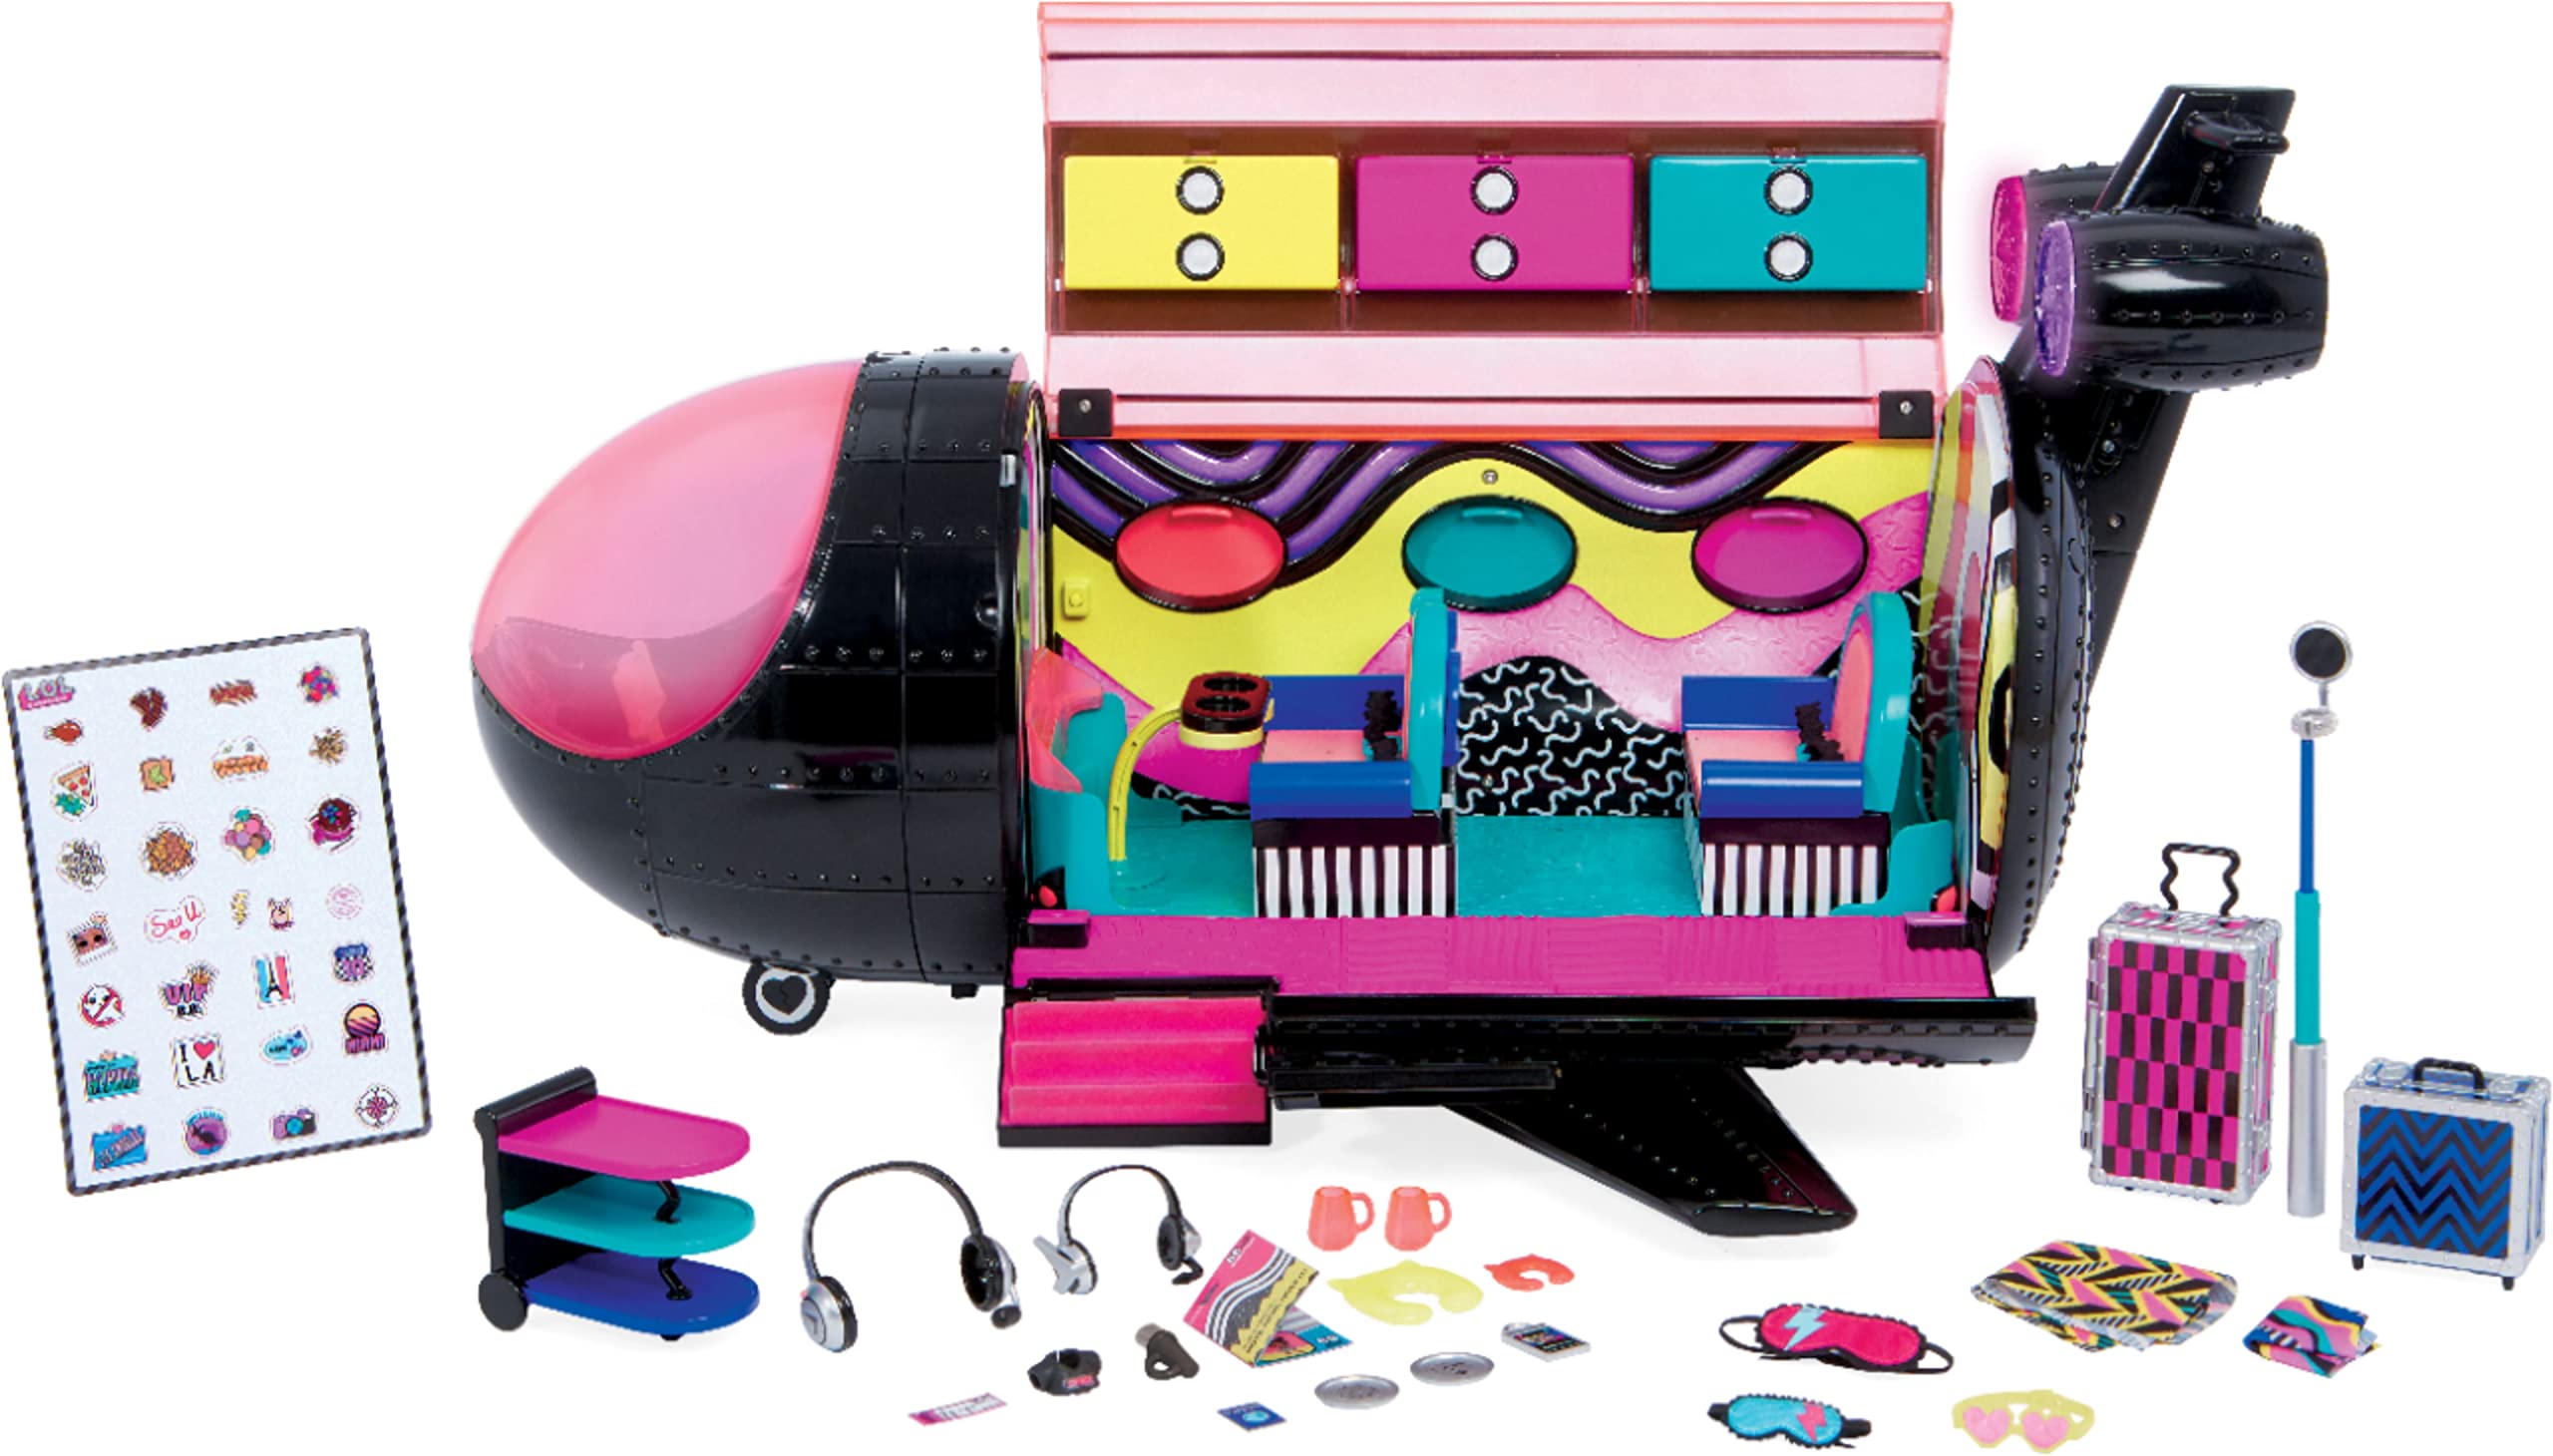 LOL Surprise OMG Remix 4 in 1 Exclusive Plane Playset Transforms 50 Surprises - Airplane, Car, Recording Studio, Mixing Booth with Colorful Doll Accessories, Play Set Gift for Kids Ages 6-11